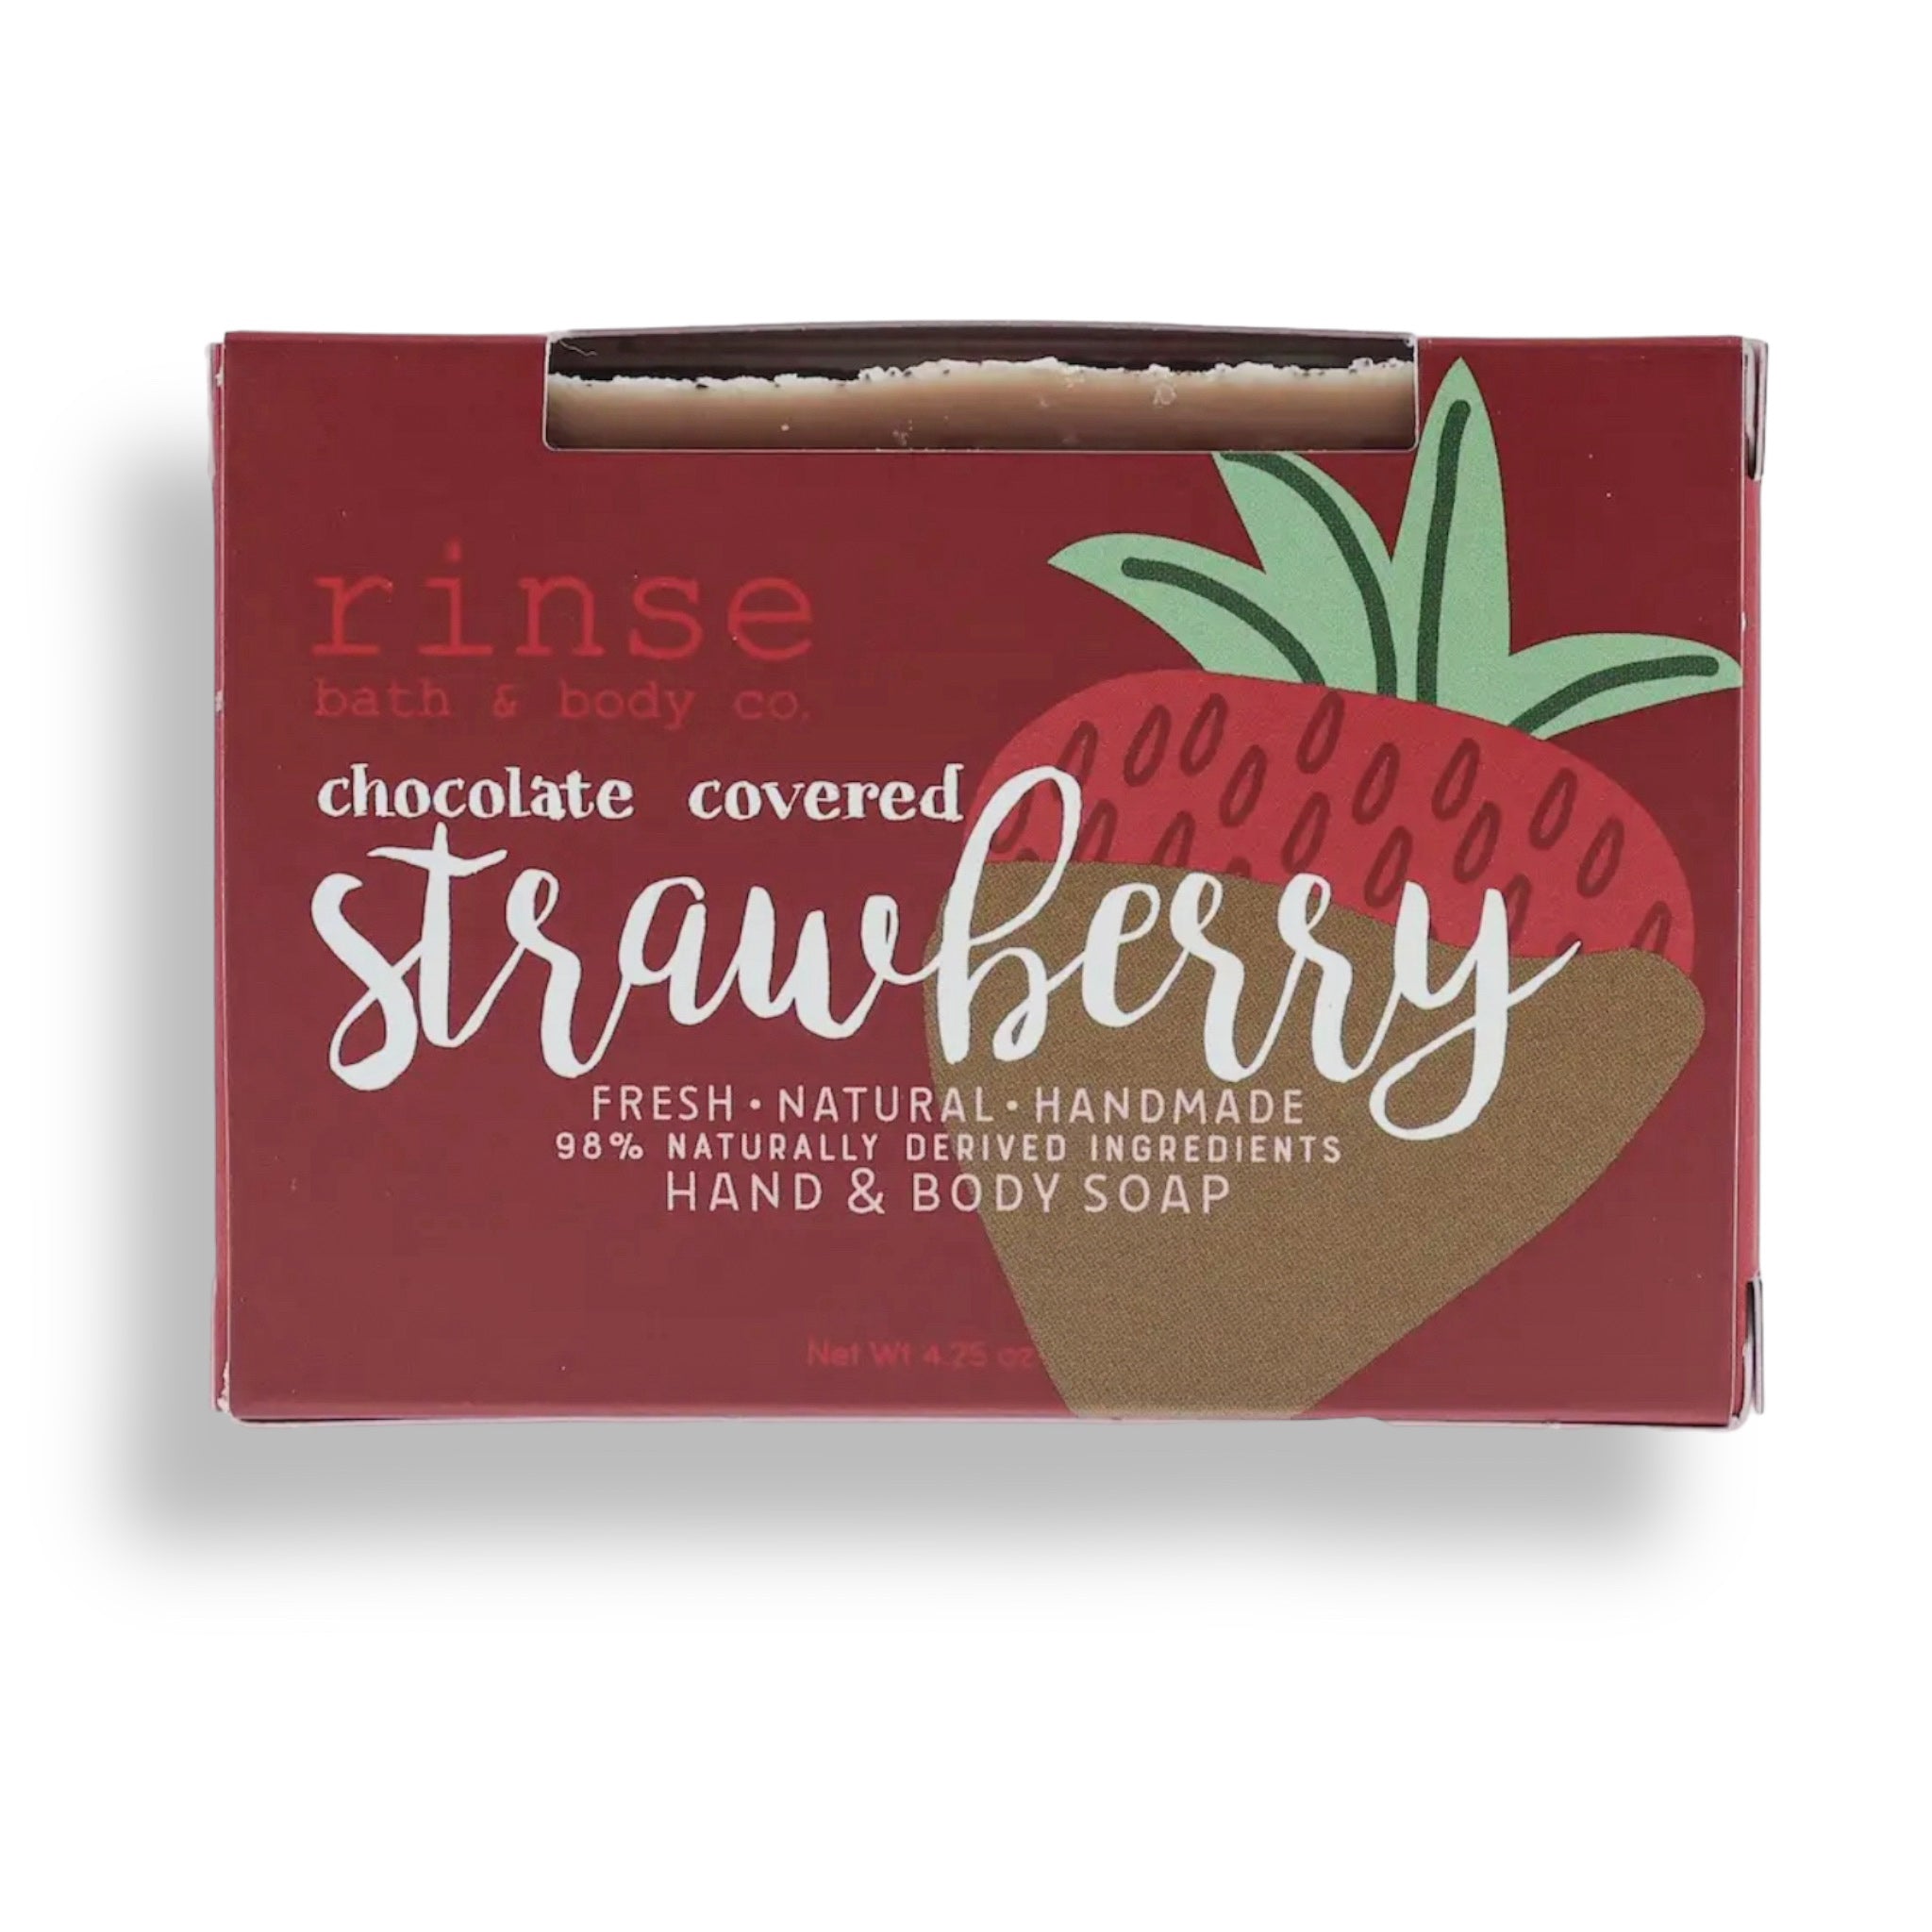 Chocolate Covered Strawberry SOAP